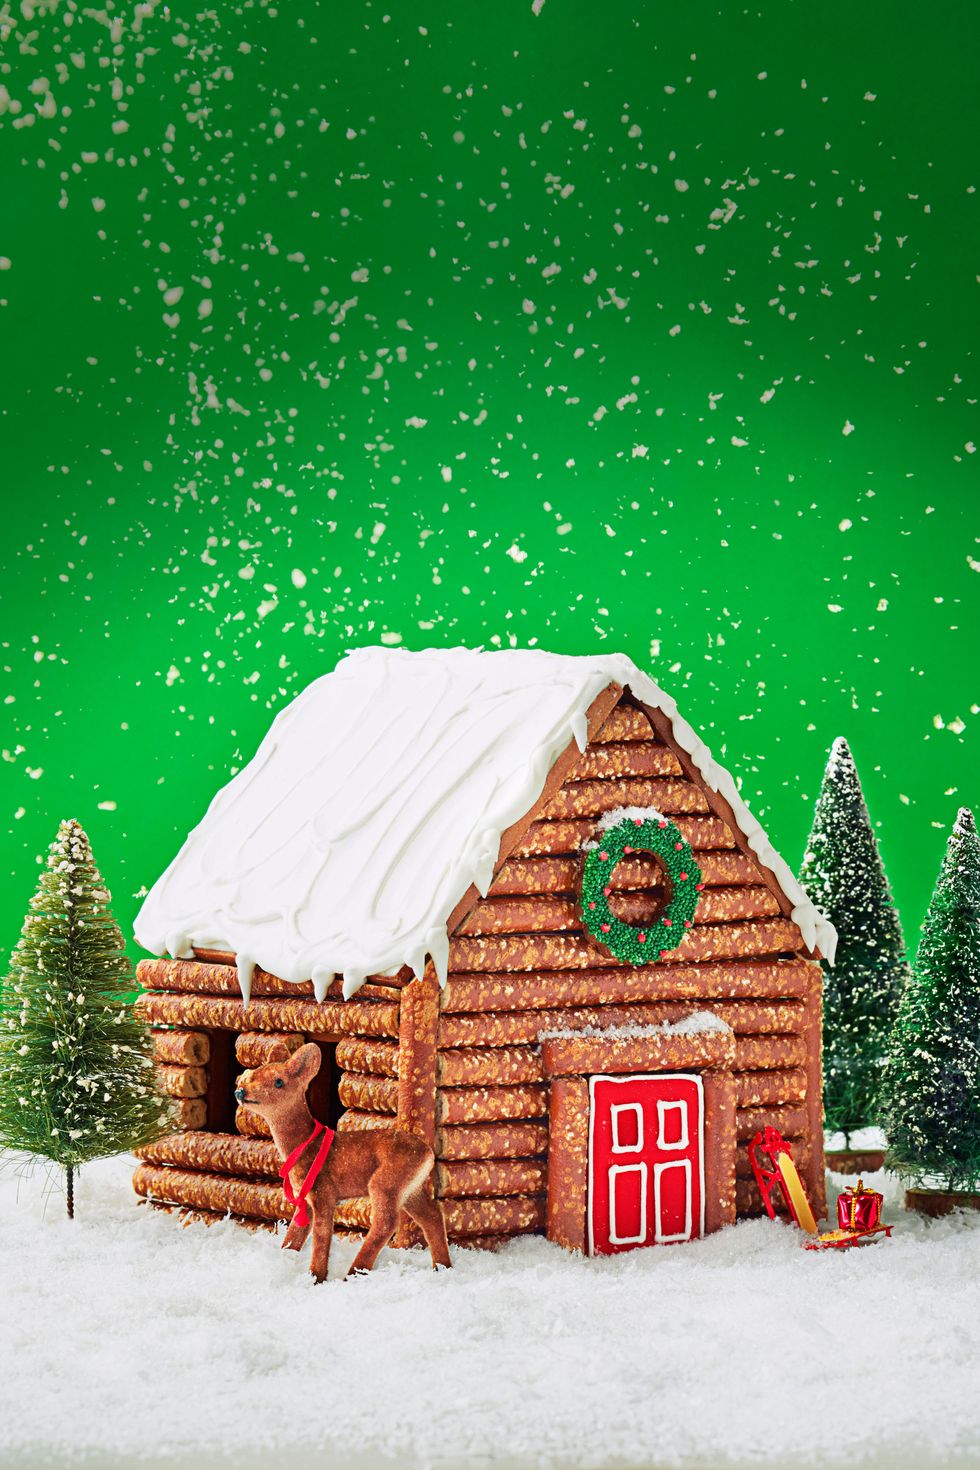 christmas gingerbread house from the 2014 issue of good housekeeping